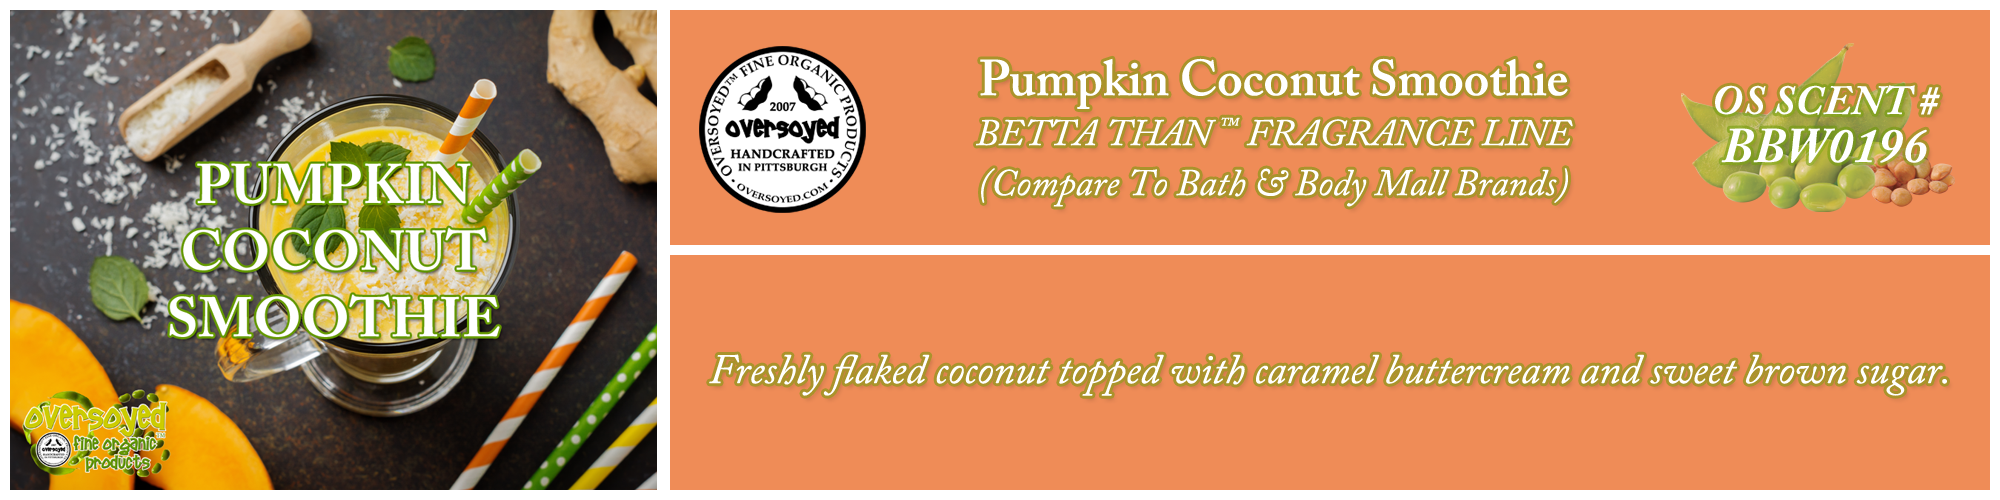 Pumpkin Coconut Smoothie Handcrafted Products Collection